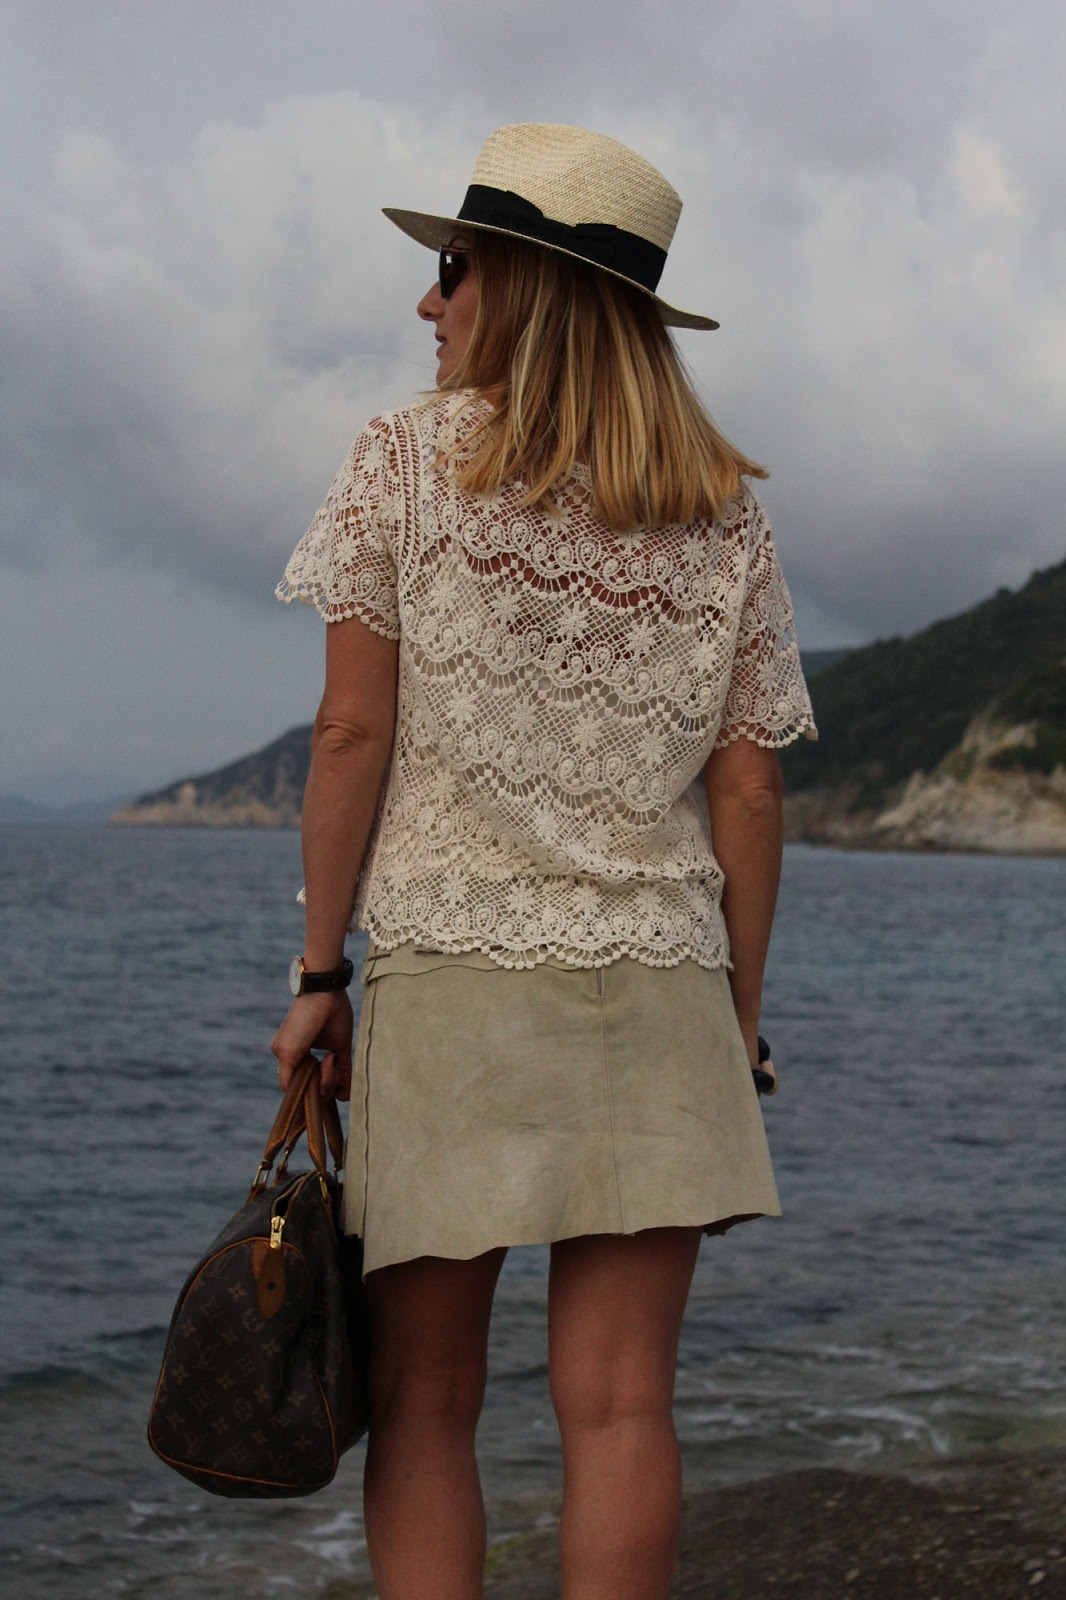 Eniwhere Fashion - Boho chic outfit - Isola d'Elba - Sant'Andrea